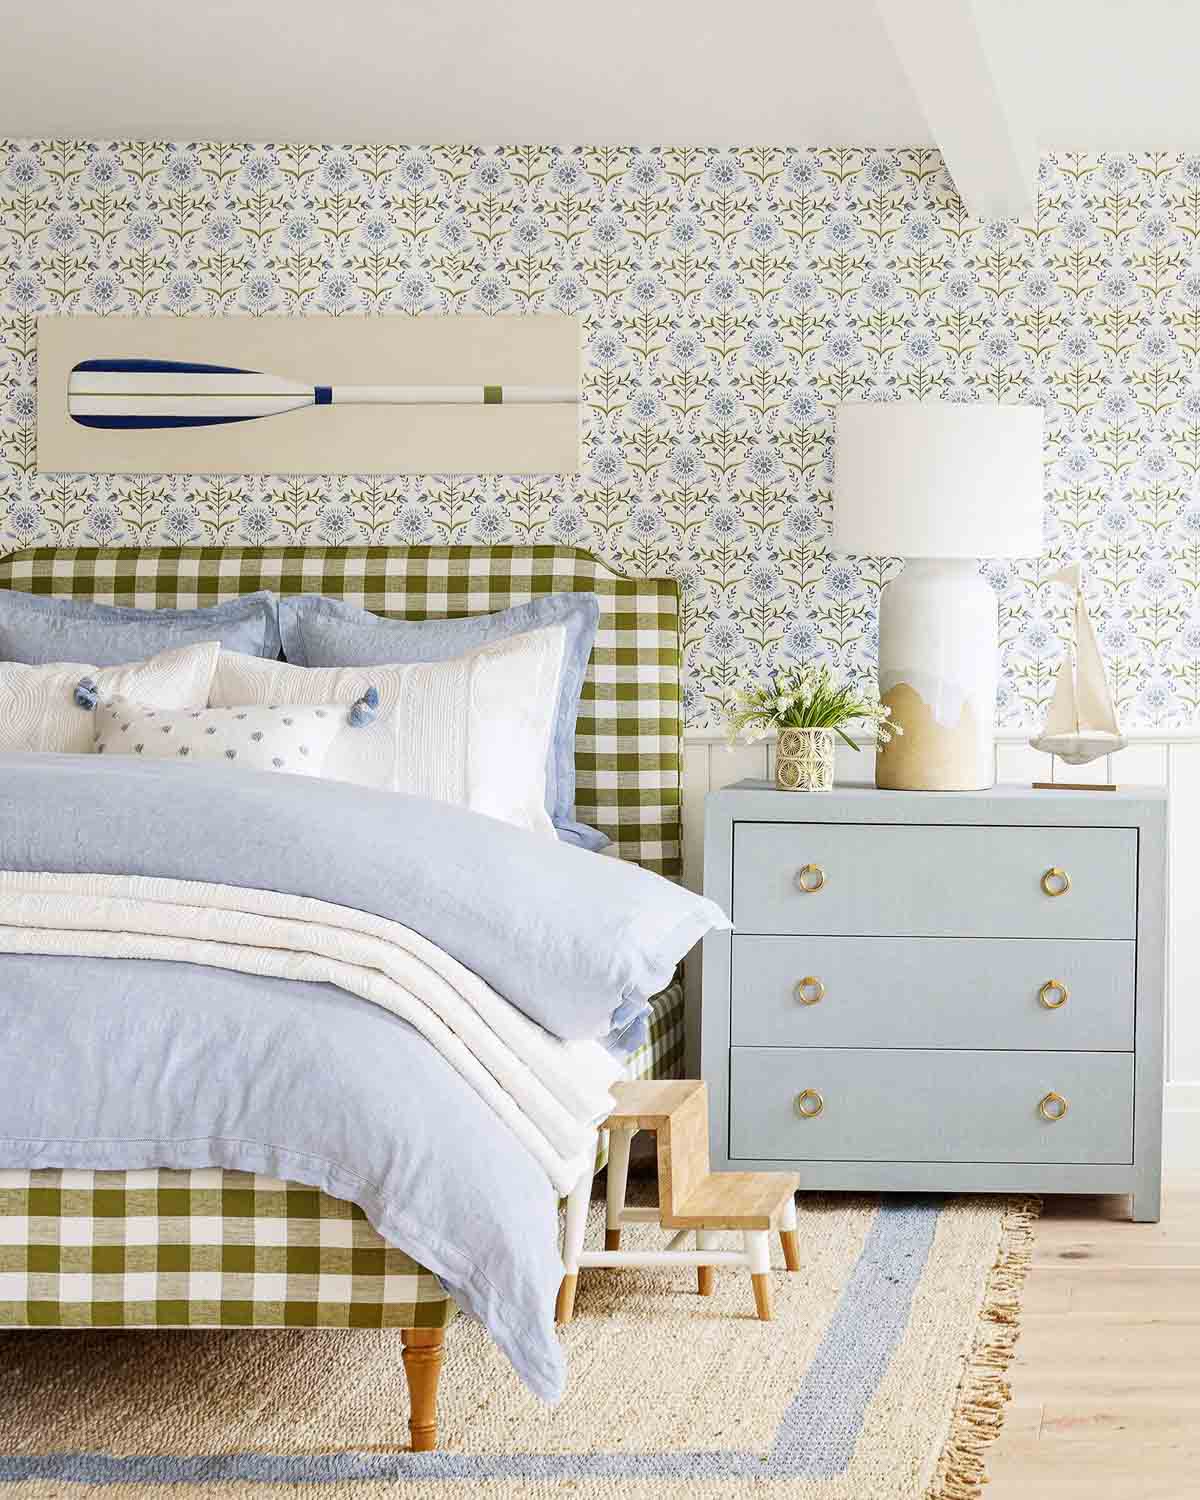 Bedroom with chest used as a nightstand